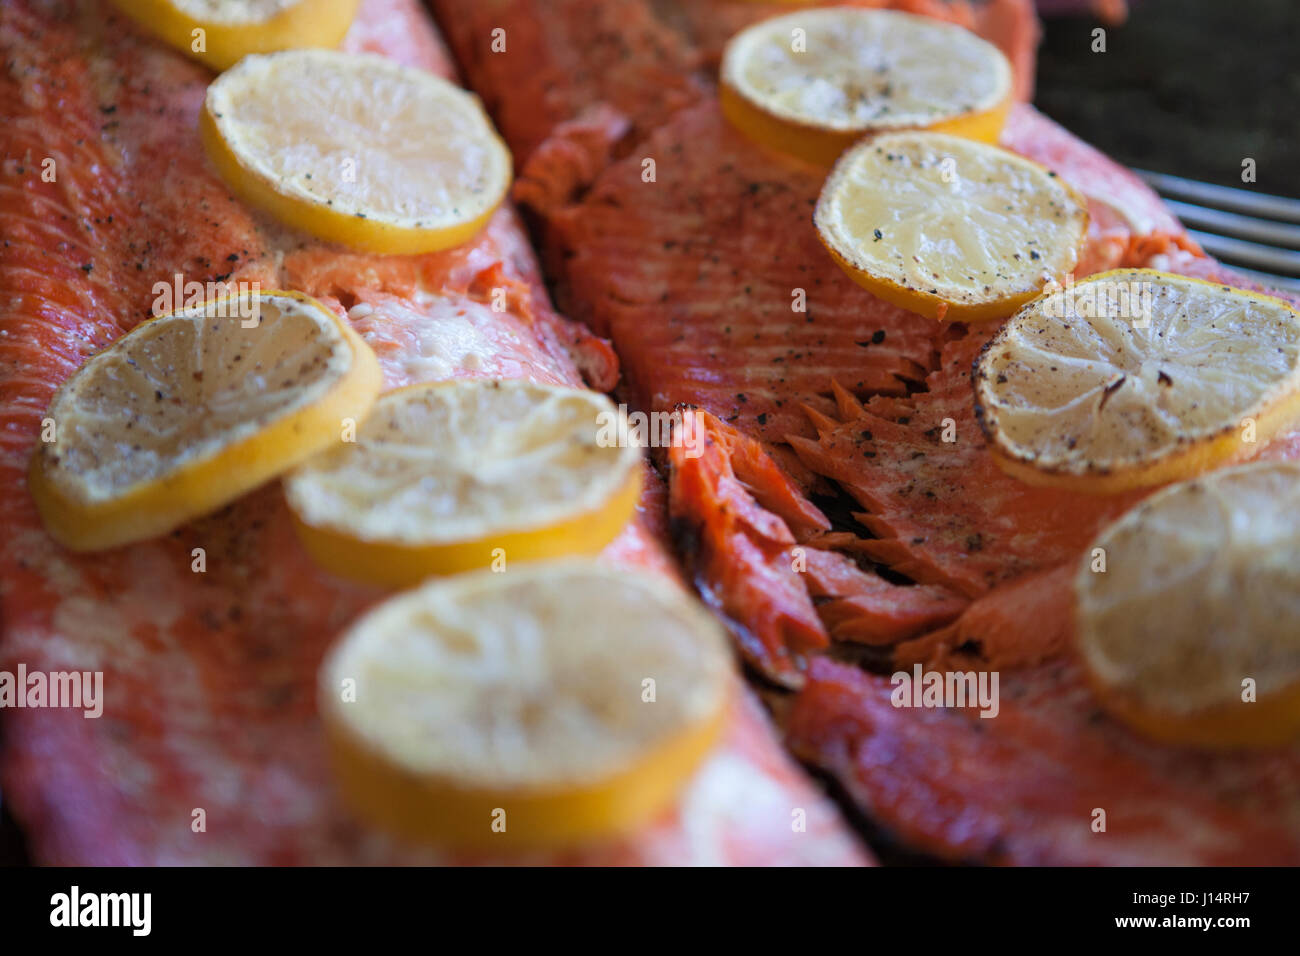 Two sides of cooked wild salmon on a plate covered with slices of lemon waiting to be served. Stock Photo